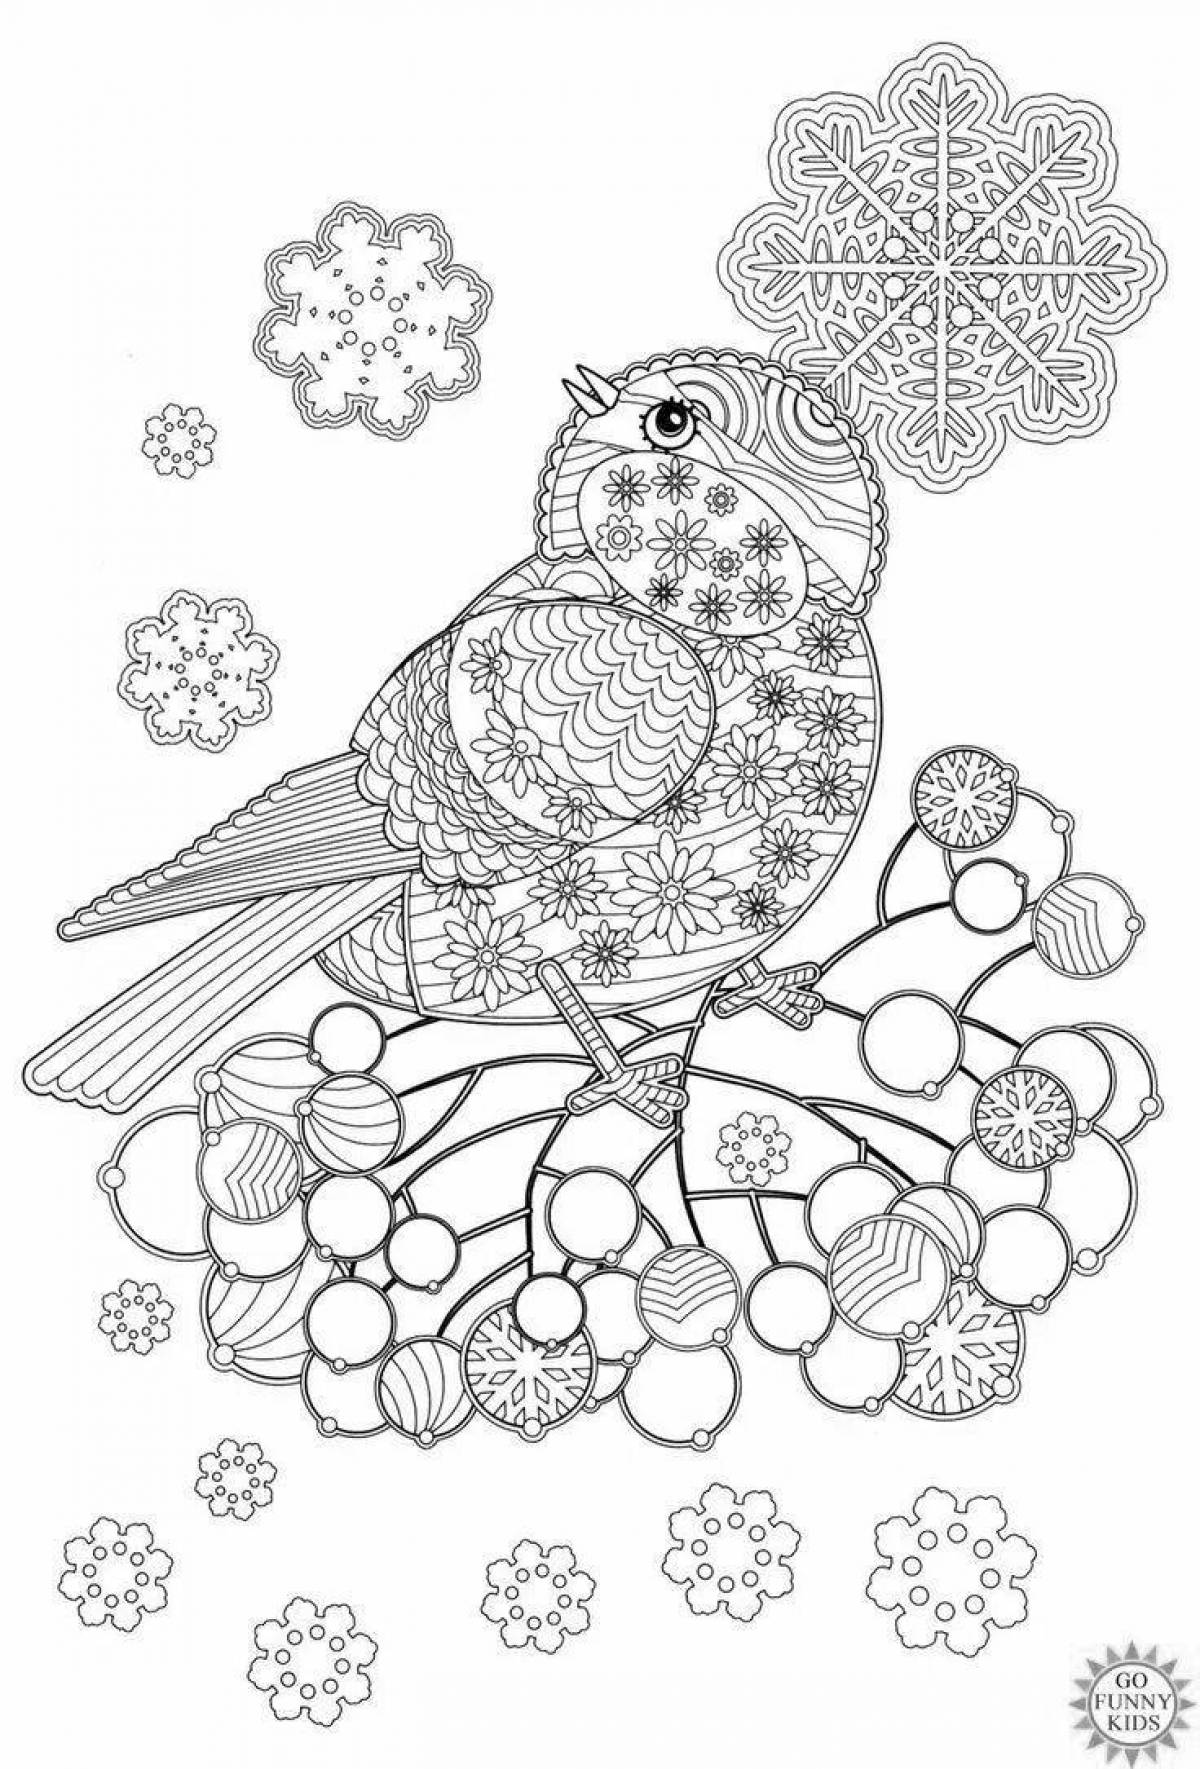 Charming winter anti-stress coloring book for kids